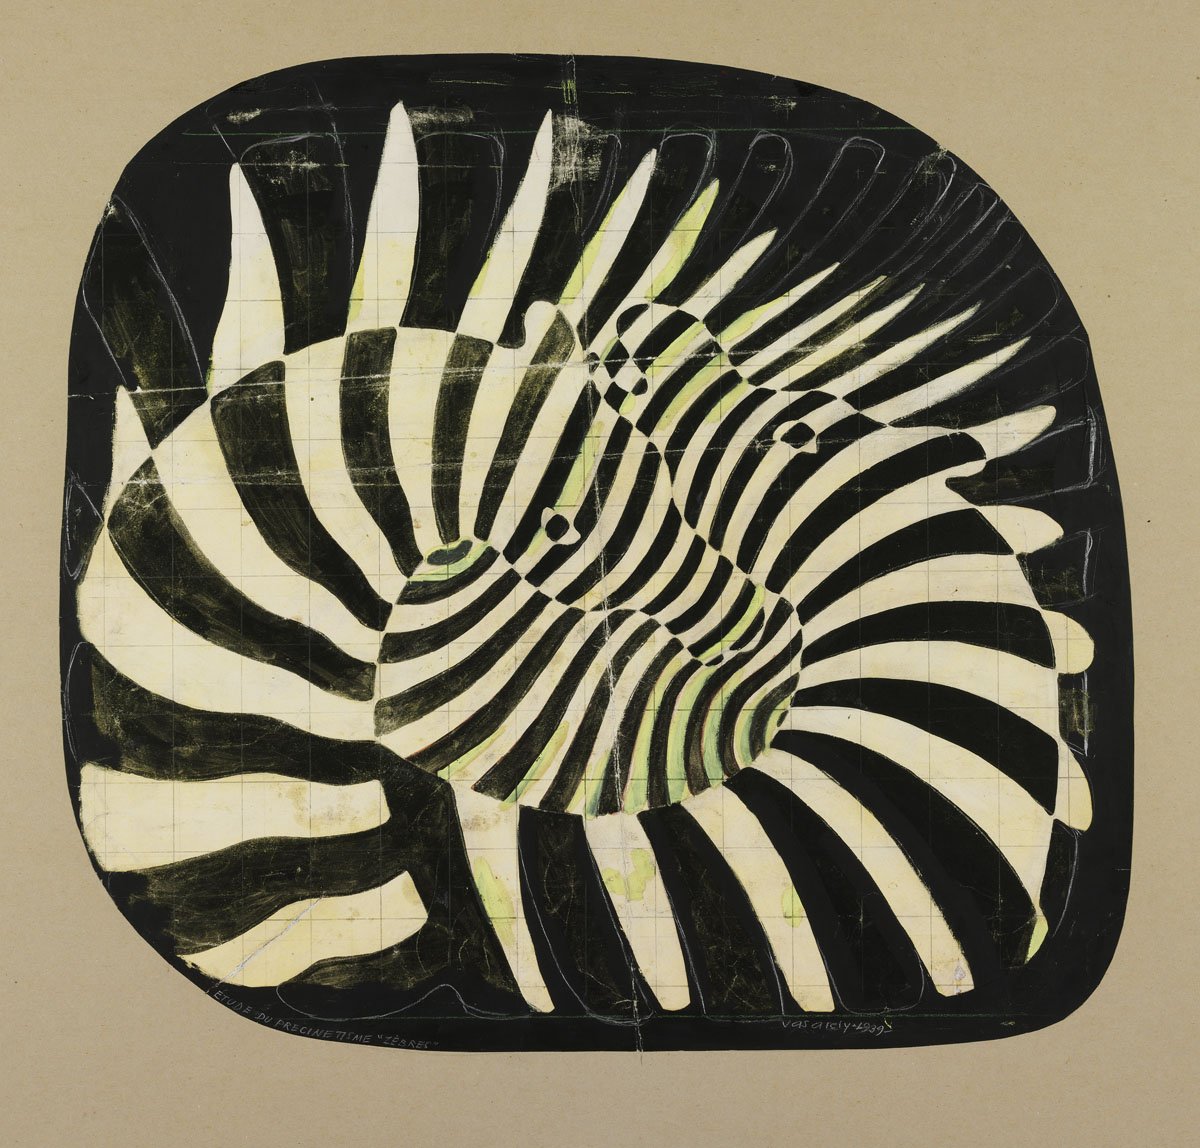 Vasarely's oeuvre 